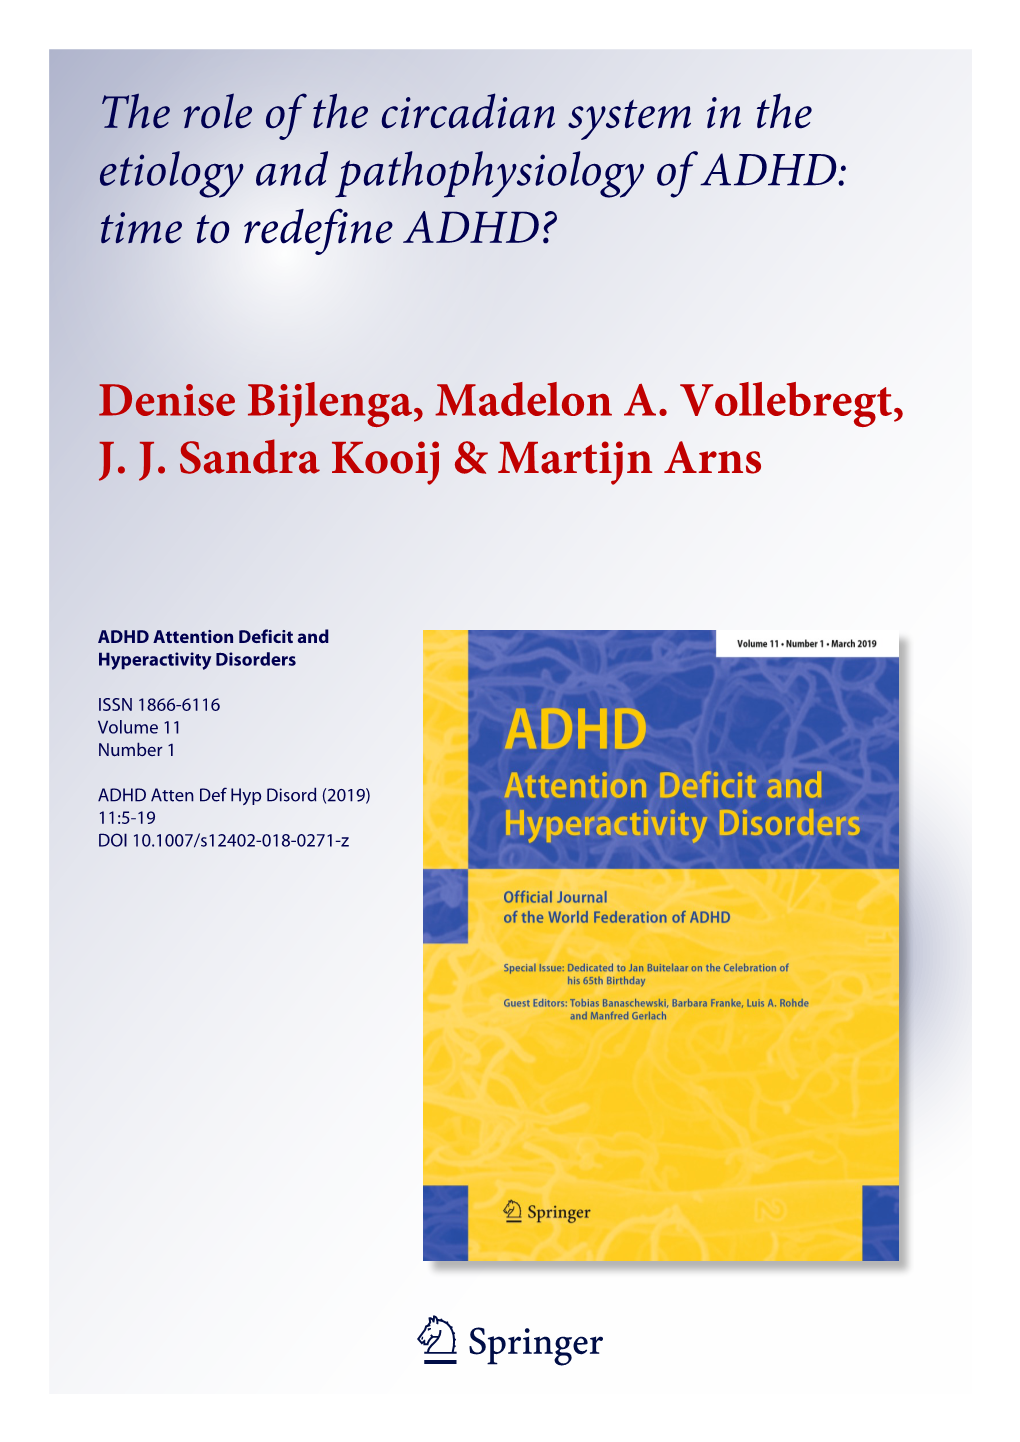 The Role of the Circadian System in the Etiology and Pathophysiology of ADHD: Time to Redefine ADHD?